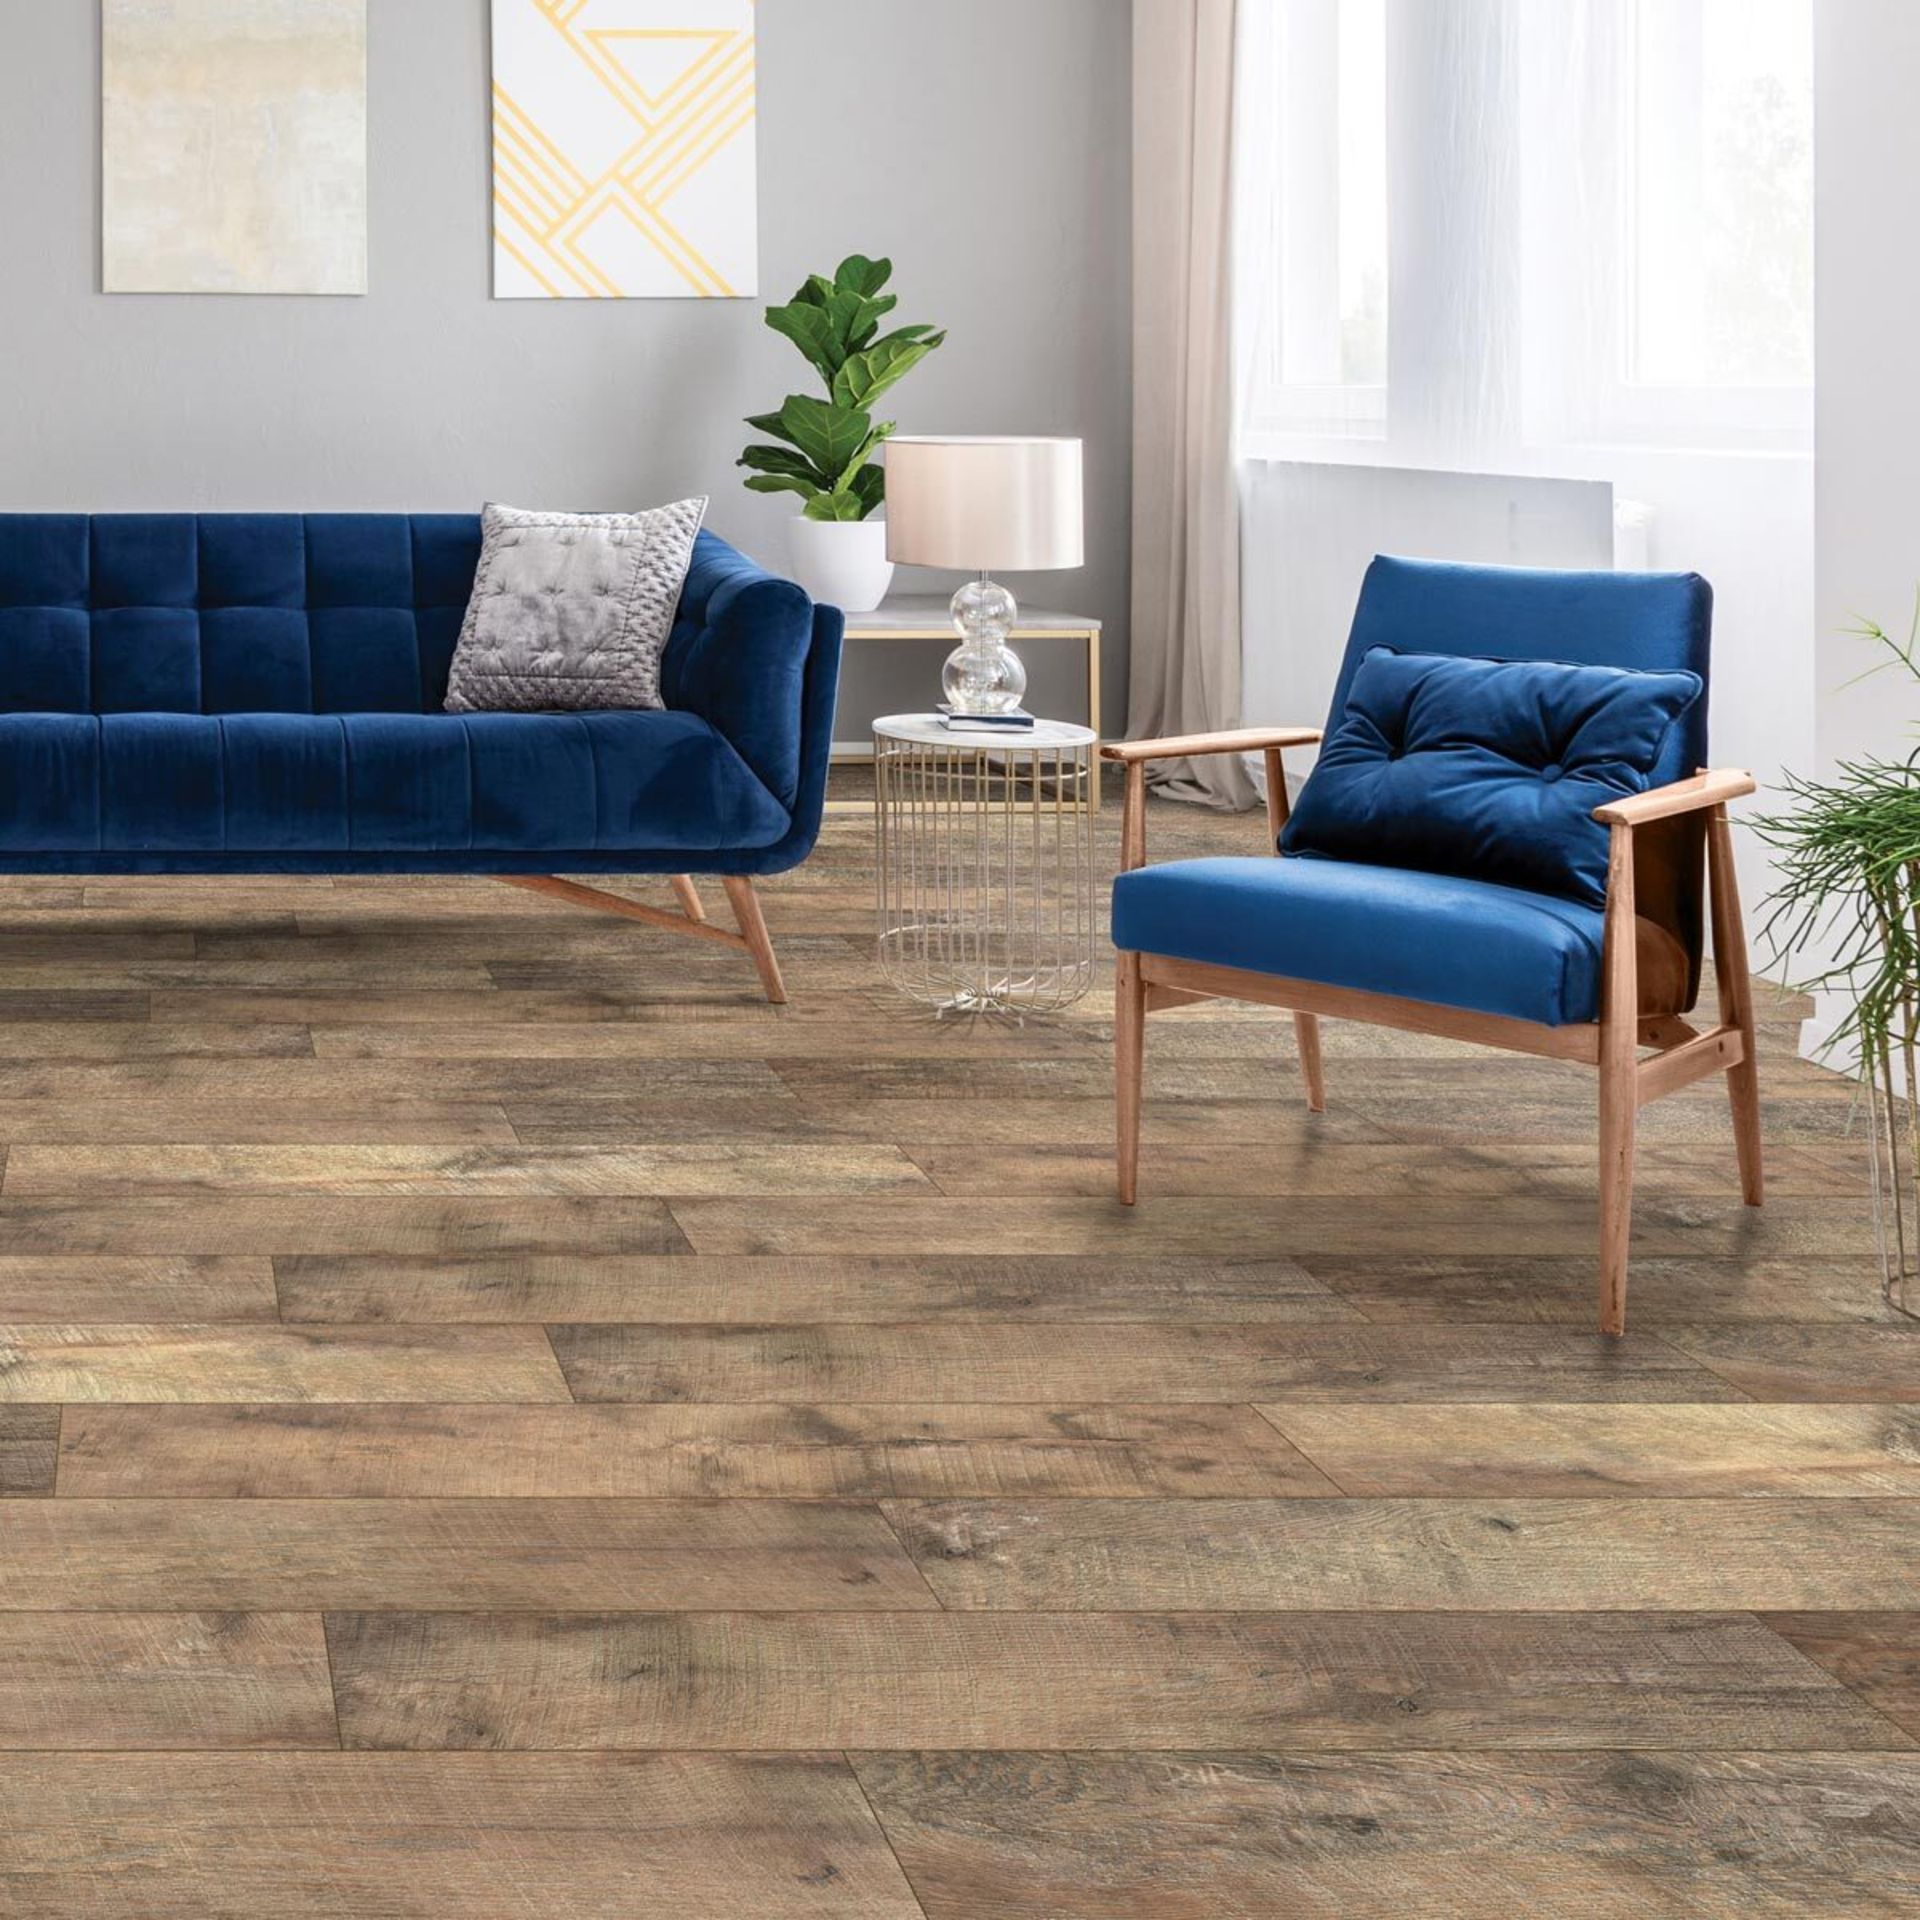 1 BOXED GOLDEN SELECT PROVIDENCE SPLASH SHIELD AC5 LAMINATE FLOORING WITH FOAM UNDERLAY - (COVERS